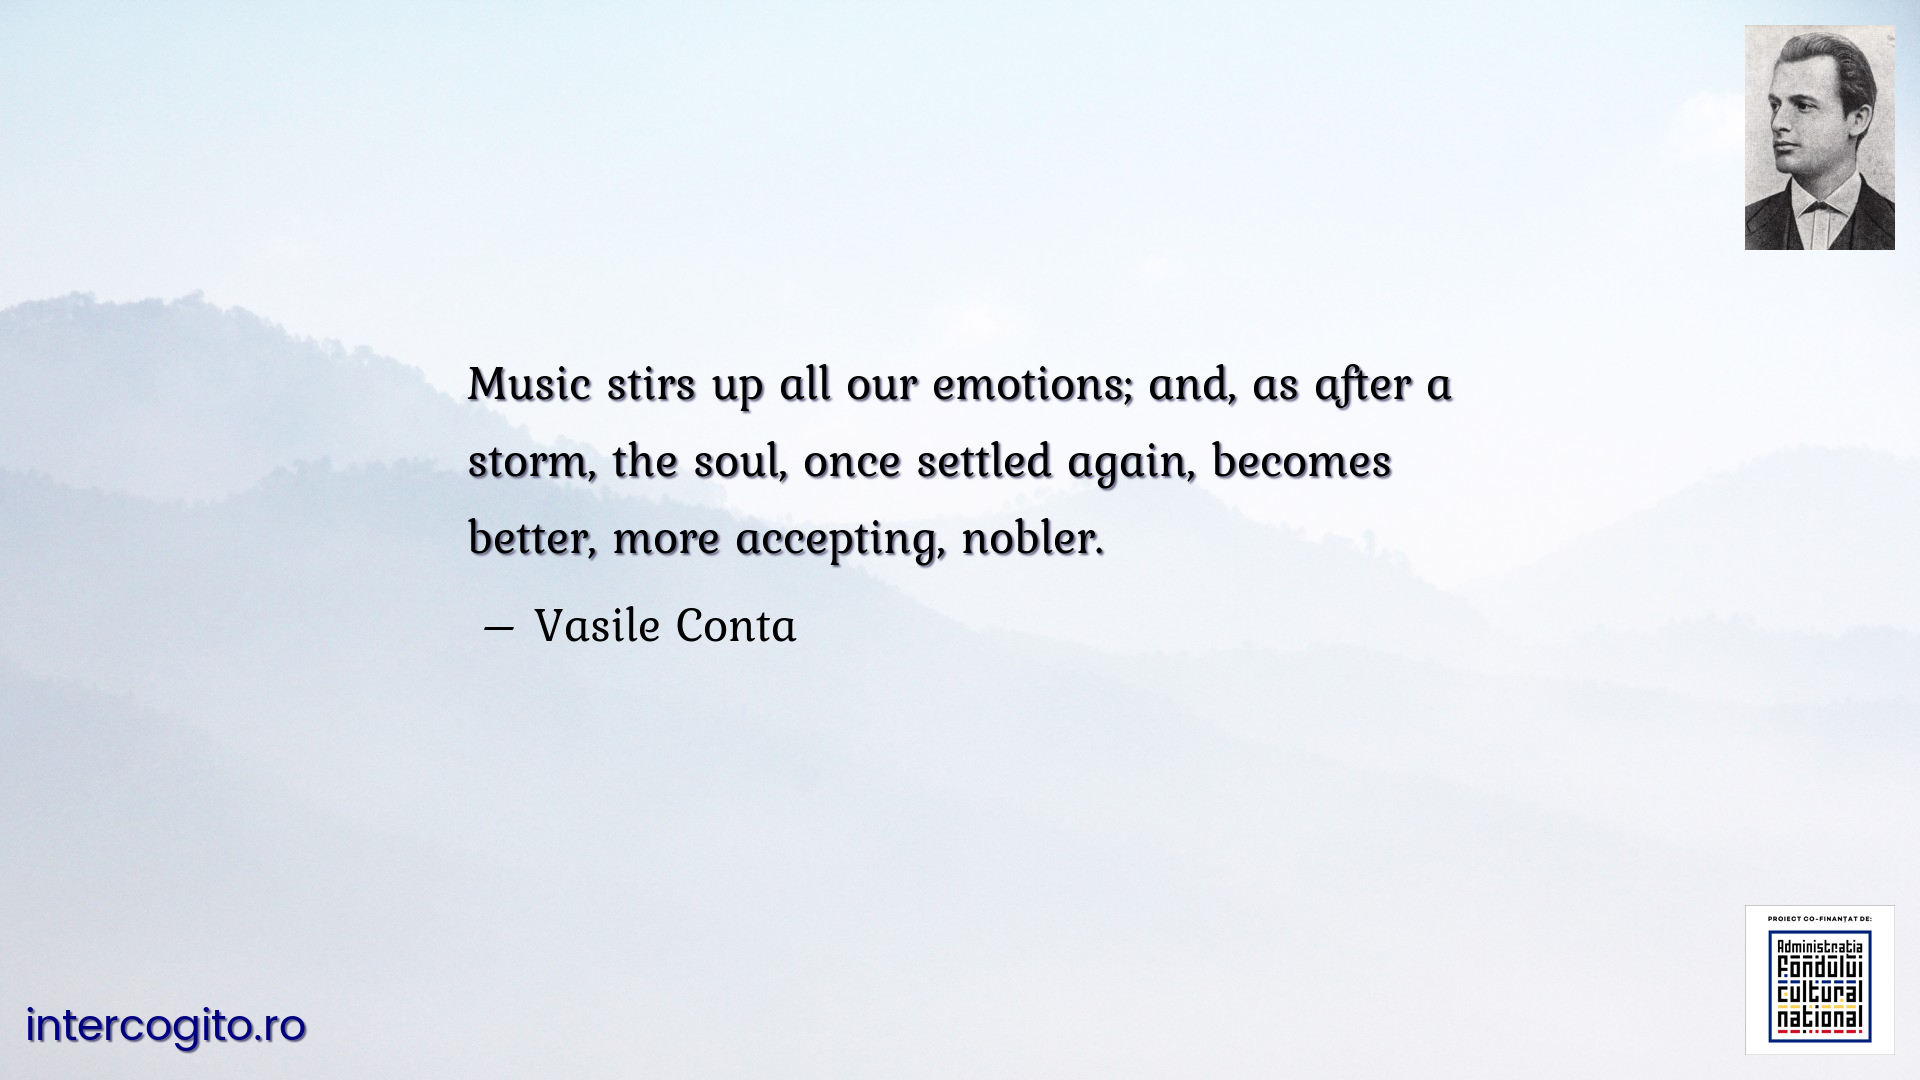 Music stirs up all our emotions; and, as after a storm, the soul, once settled again, becomes better, more accepting, nobler.